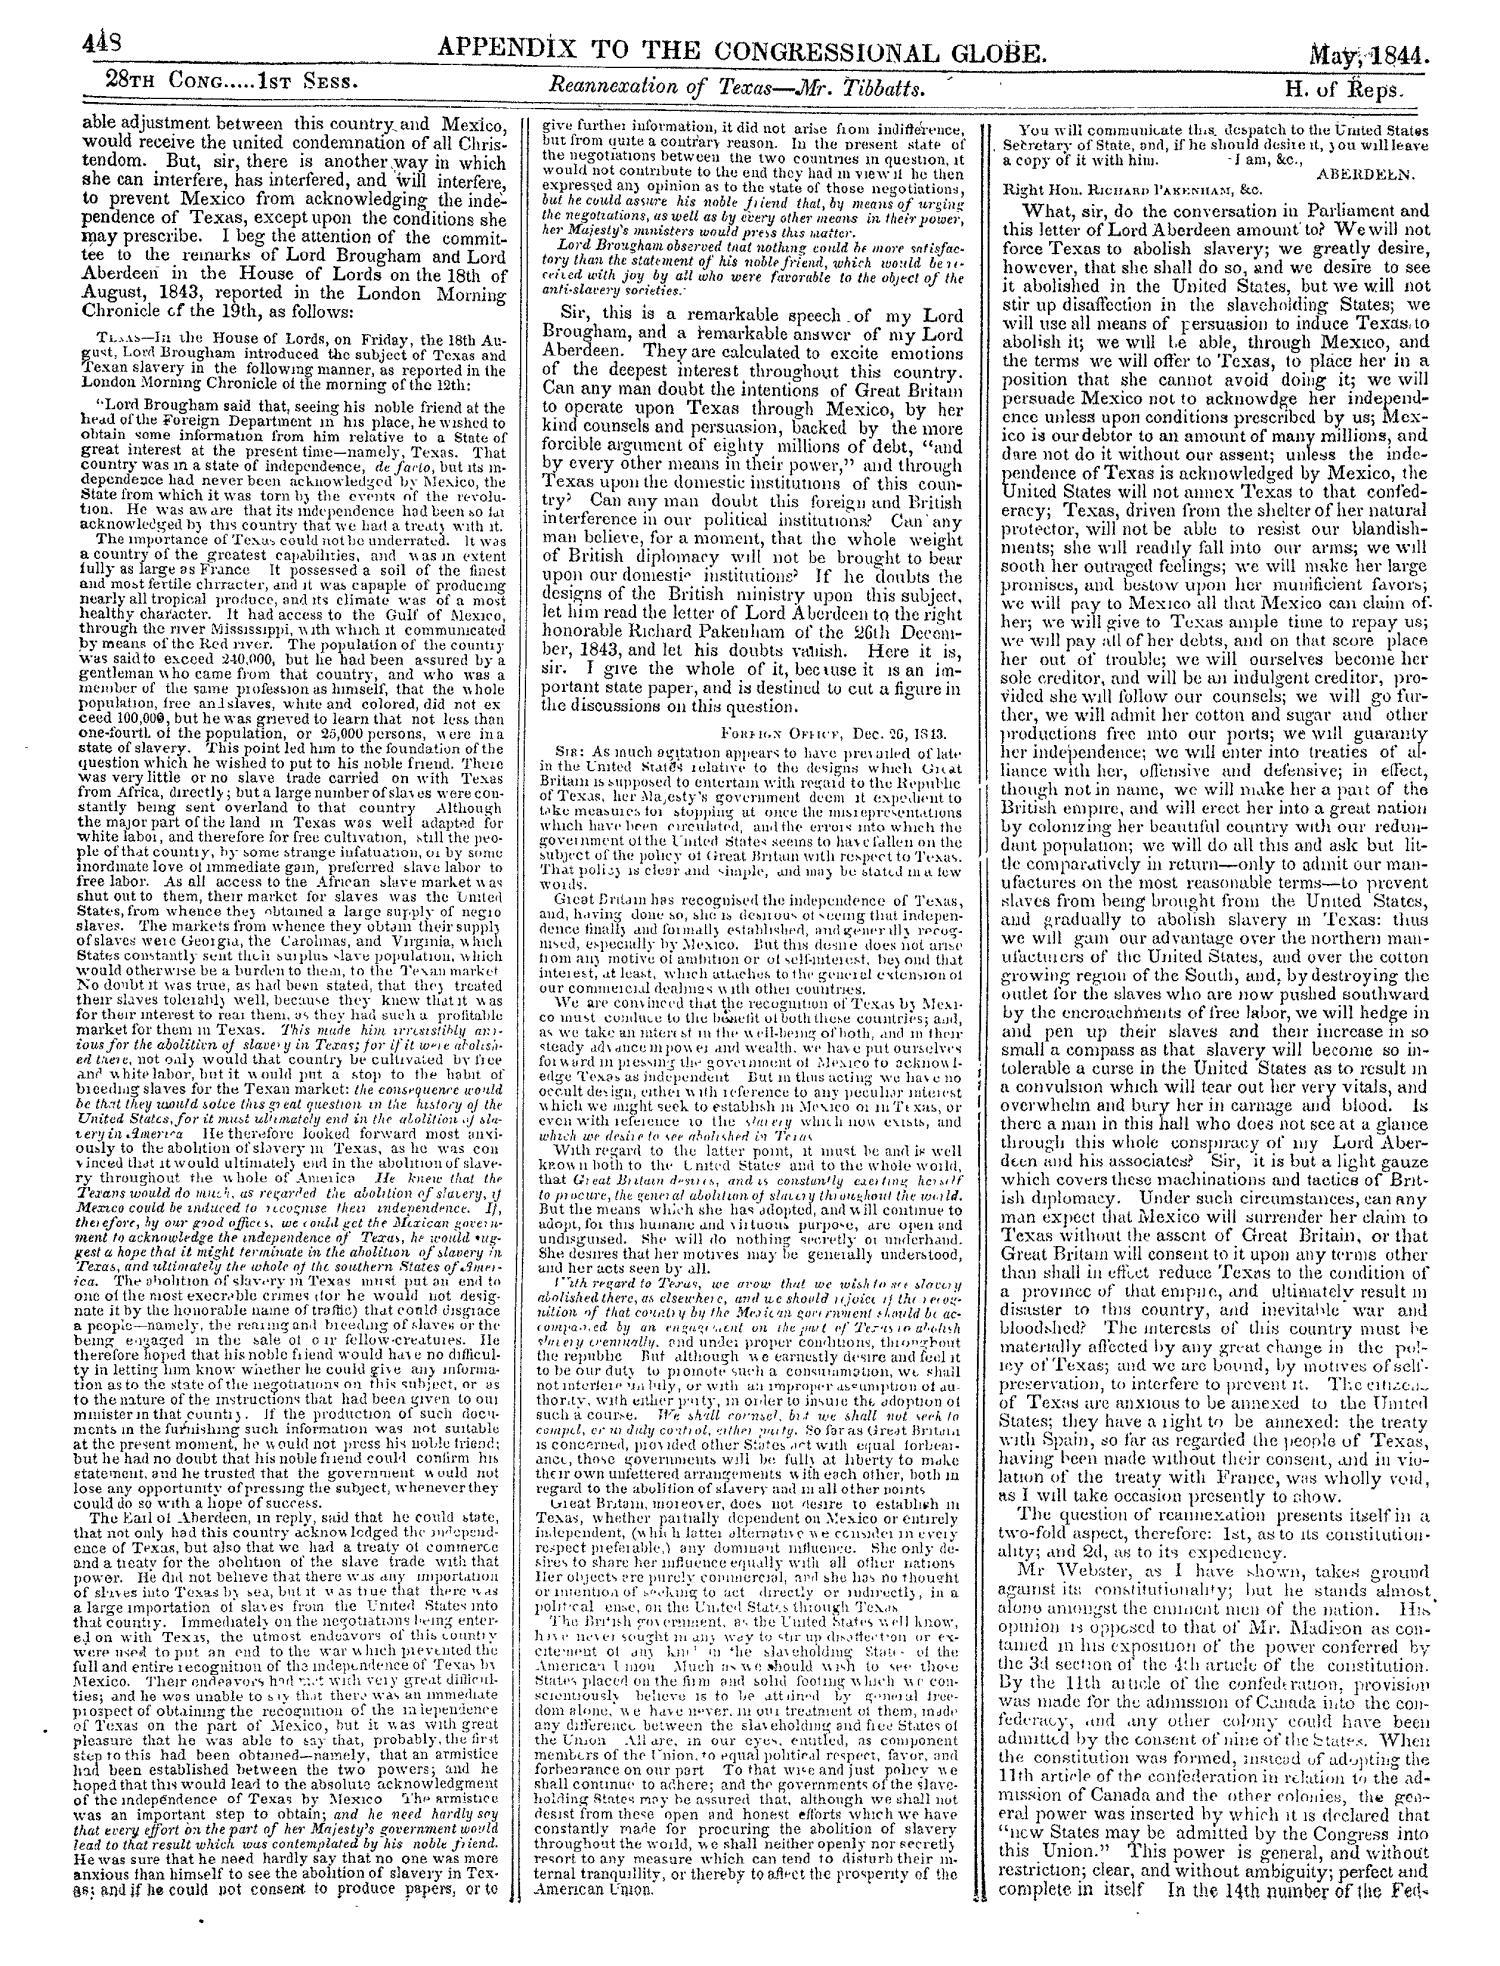 The Congressional Globe, Volume 13, Part 2: Twenty-Eighth Congress, First Session
                                                
                                                    448
                                                